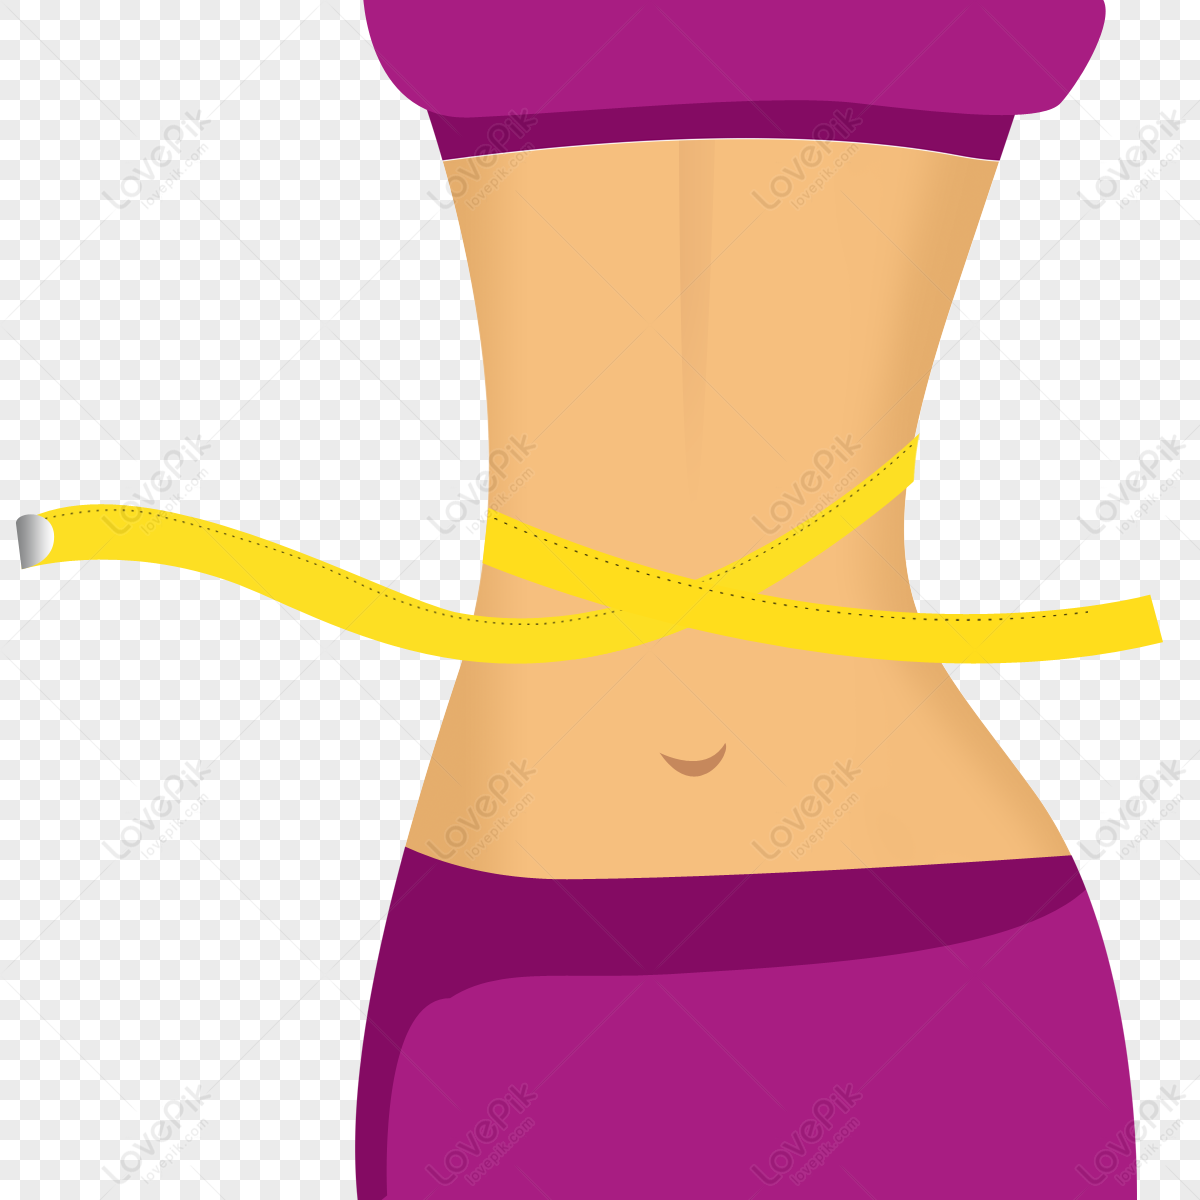 Lose Weight PNG Images With Transparent Background